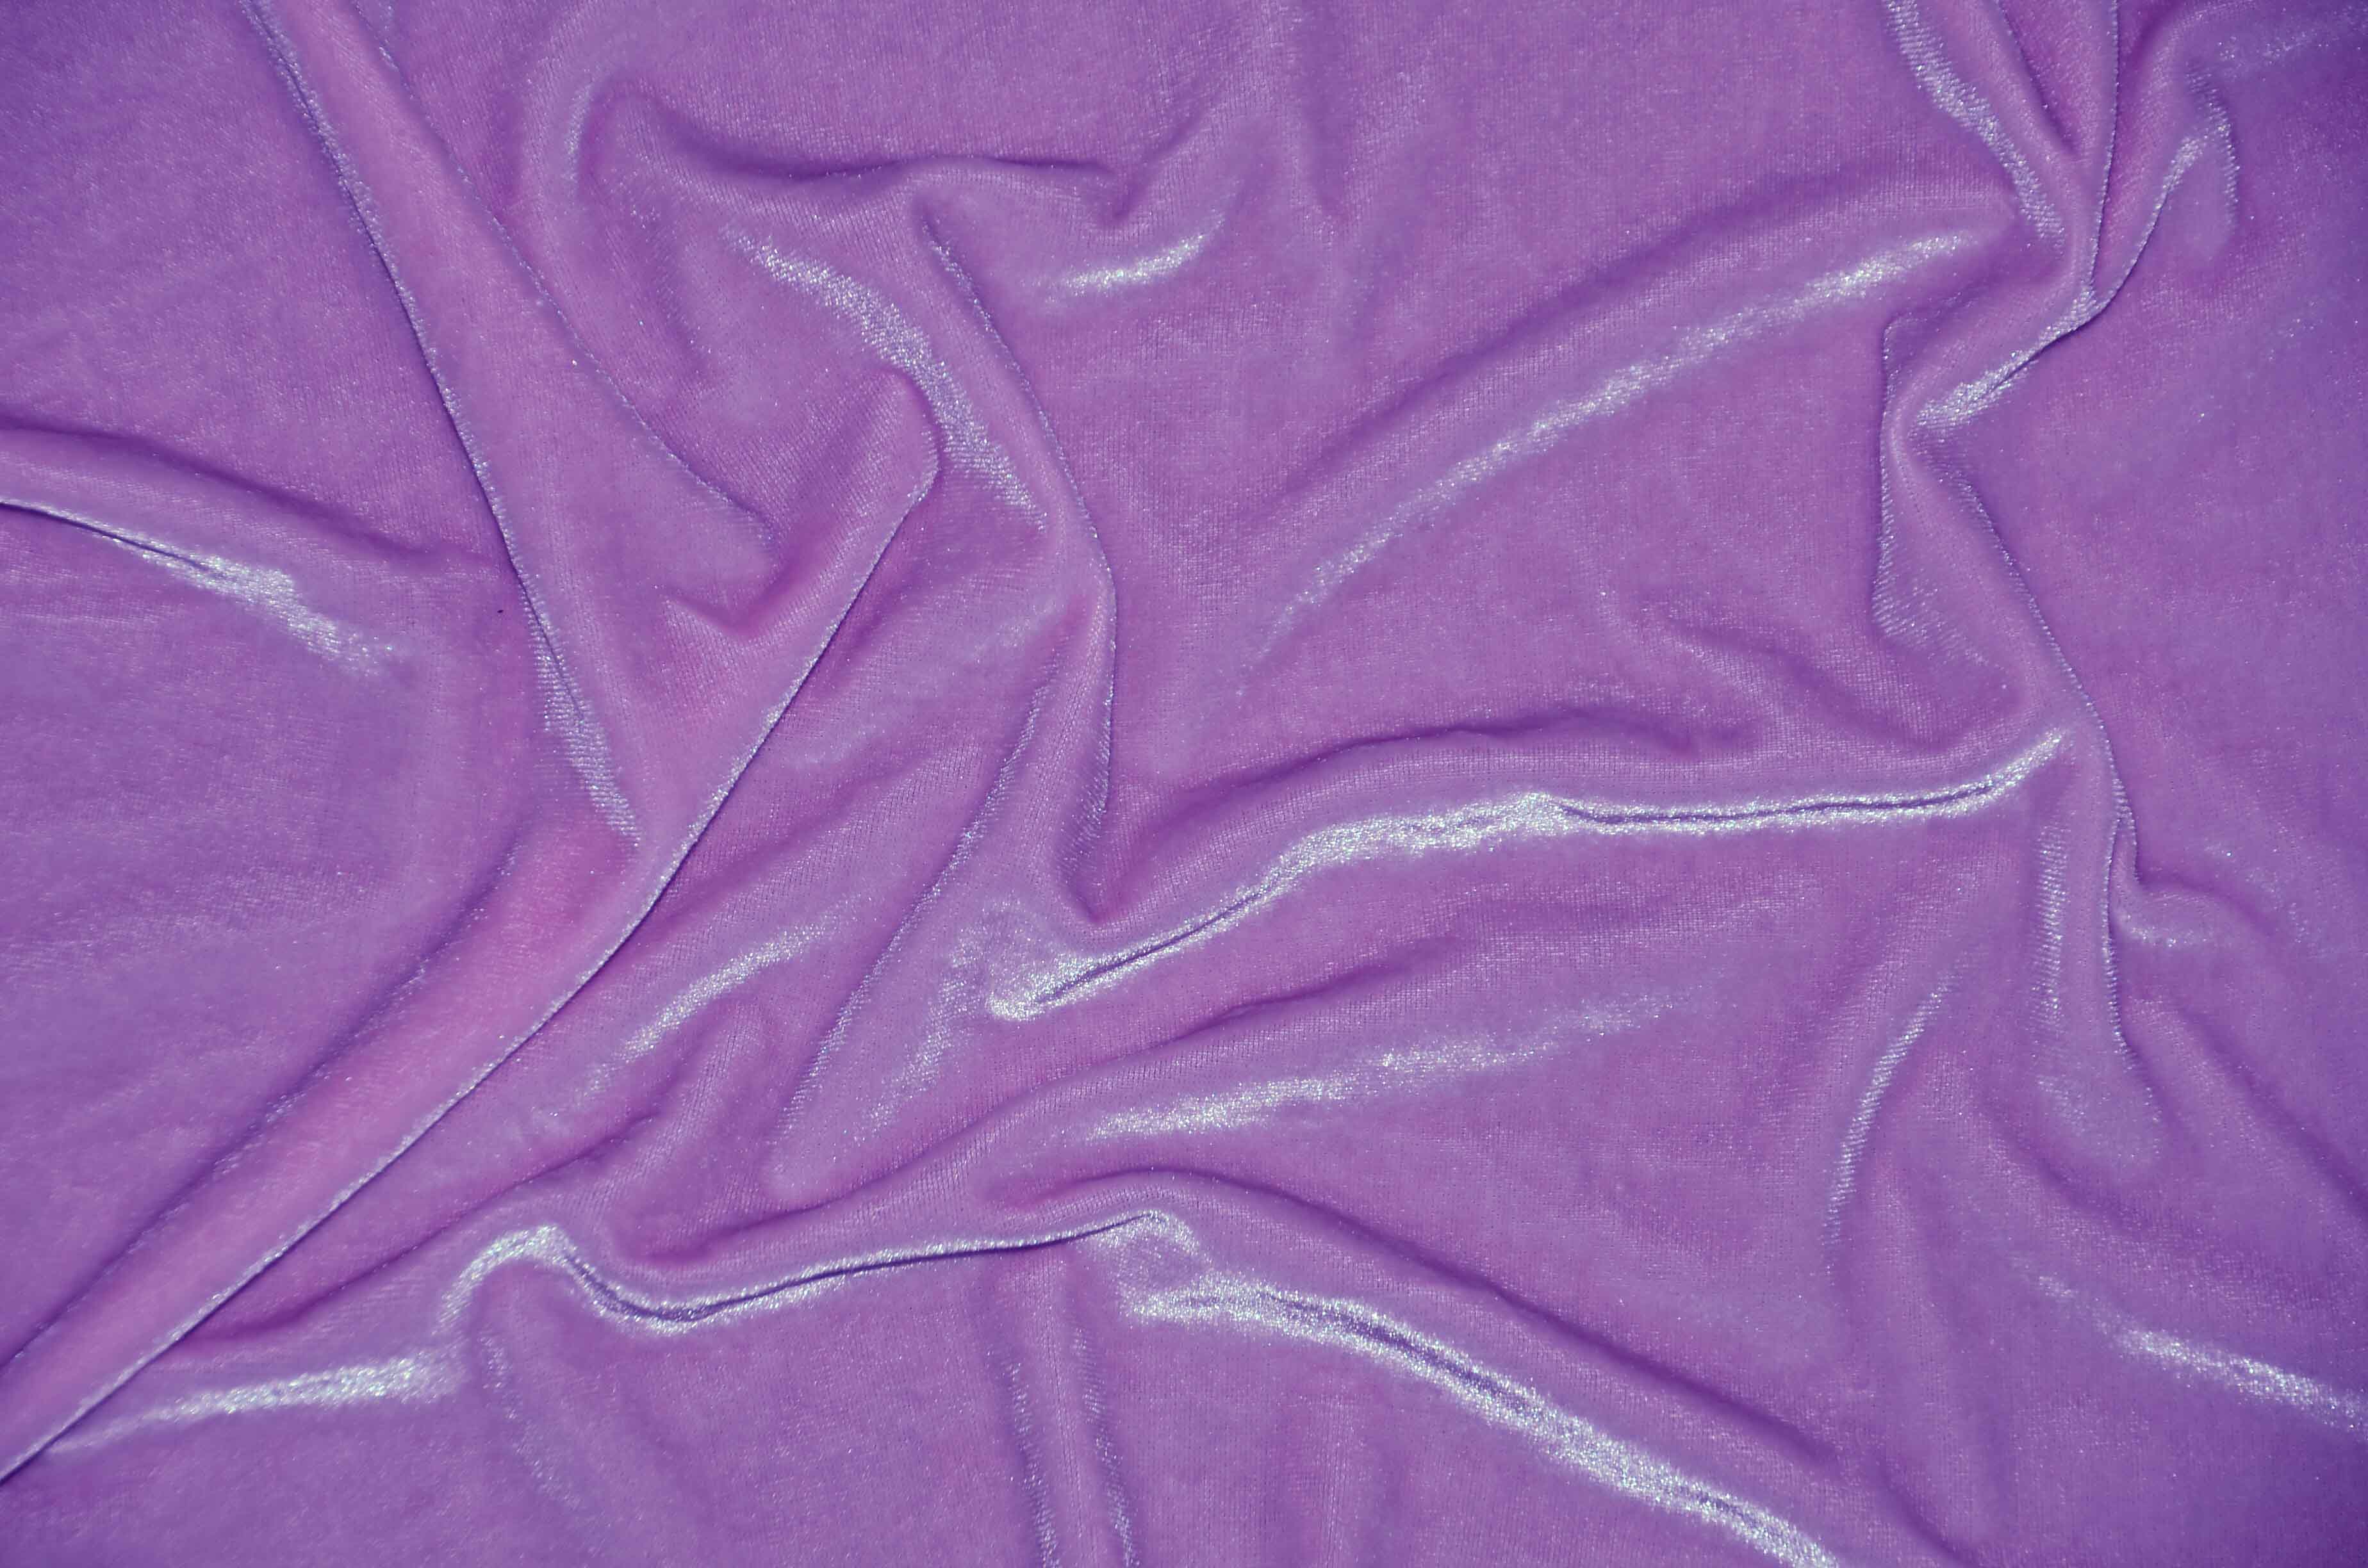 Soft and Plush Stretch Velvet Fabric | Stretch Velvet Spandex | 58" Wide | Spandex Velour for Apparel, Costume, Cosplay, Drapes | Fabric mytextilefabric Yards Lilac 